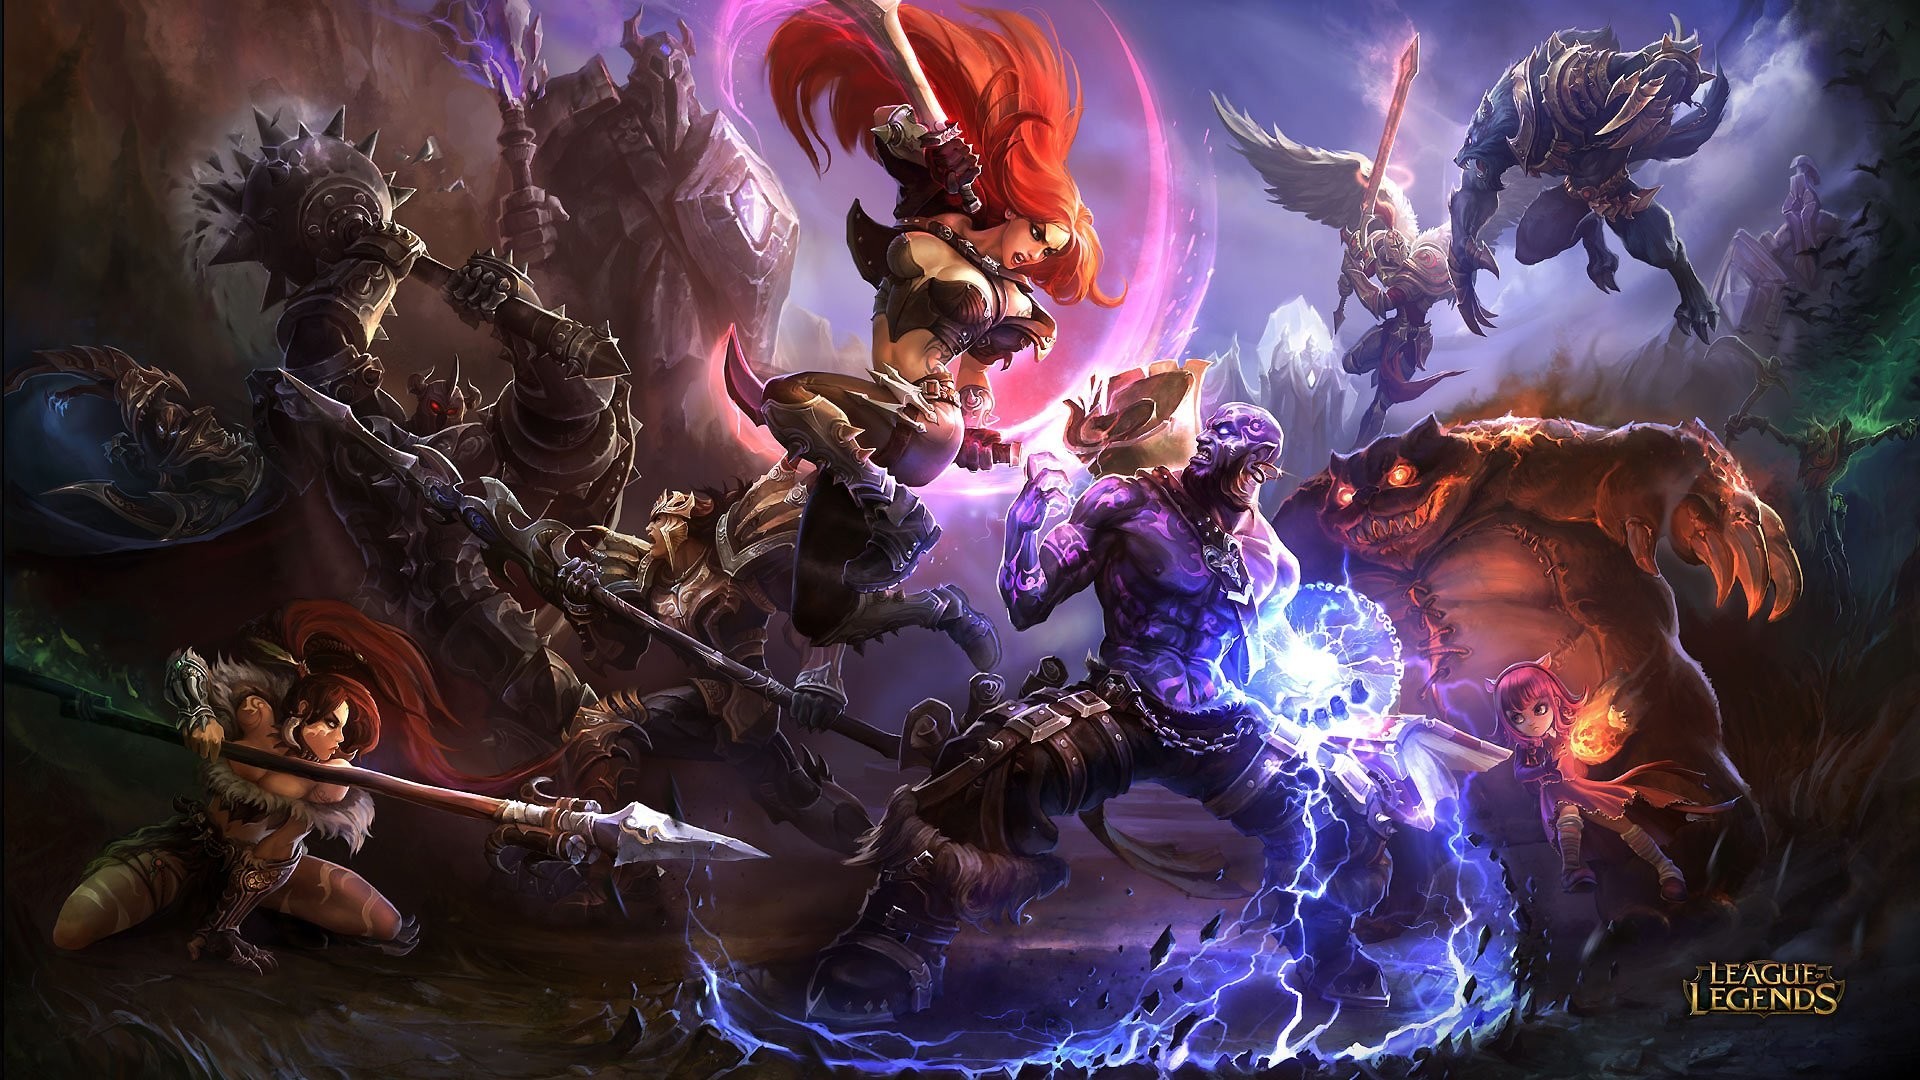 1920x1080 Cool League Of Legends Wallpapers wallpaper league legends draven wallpapers  cool background desktop images .